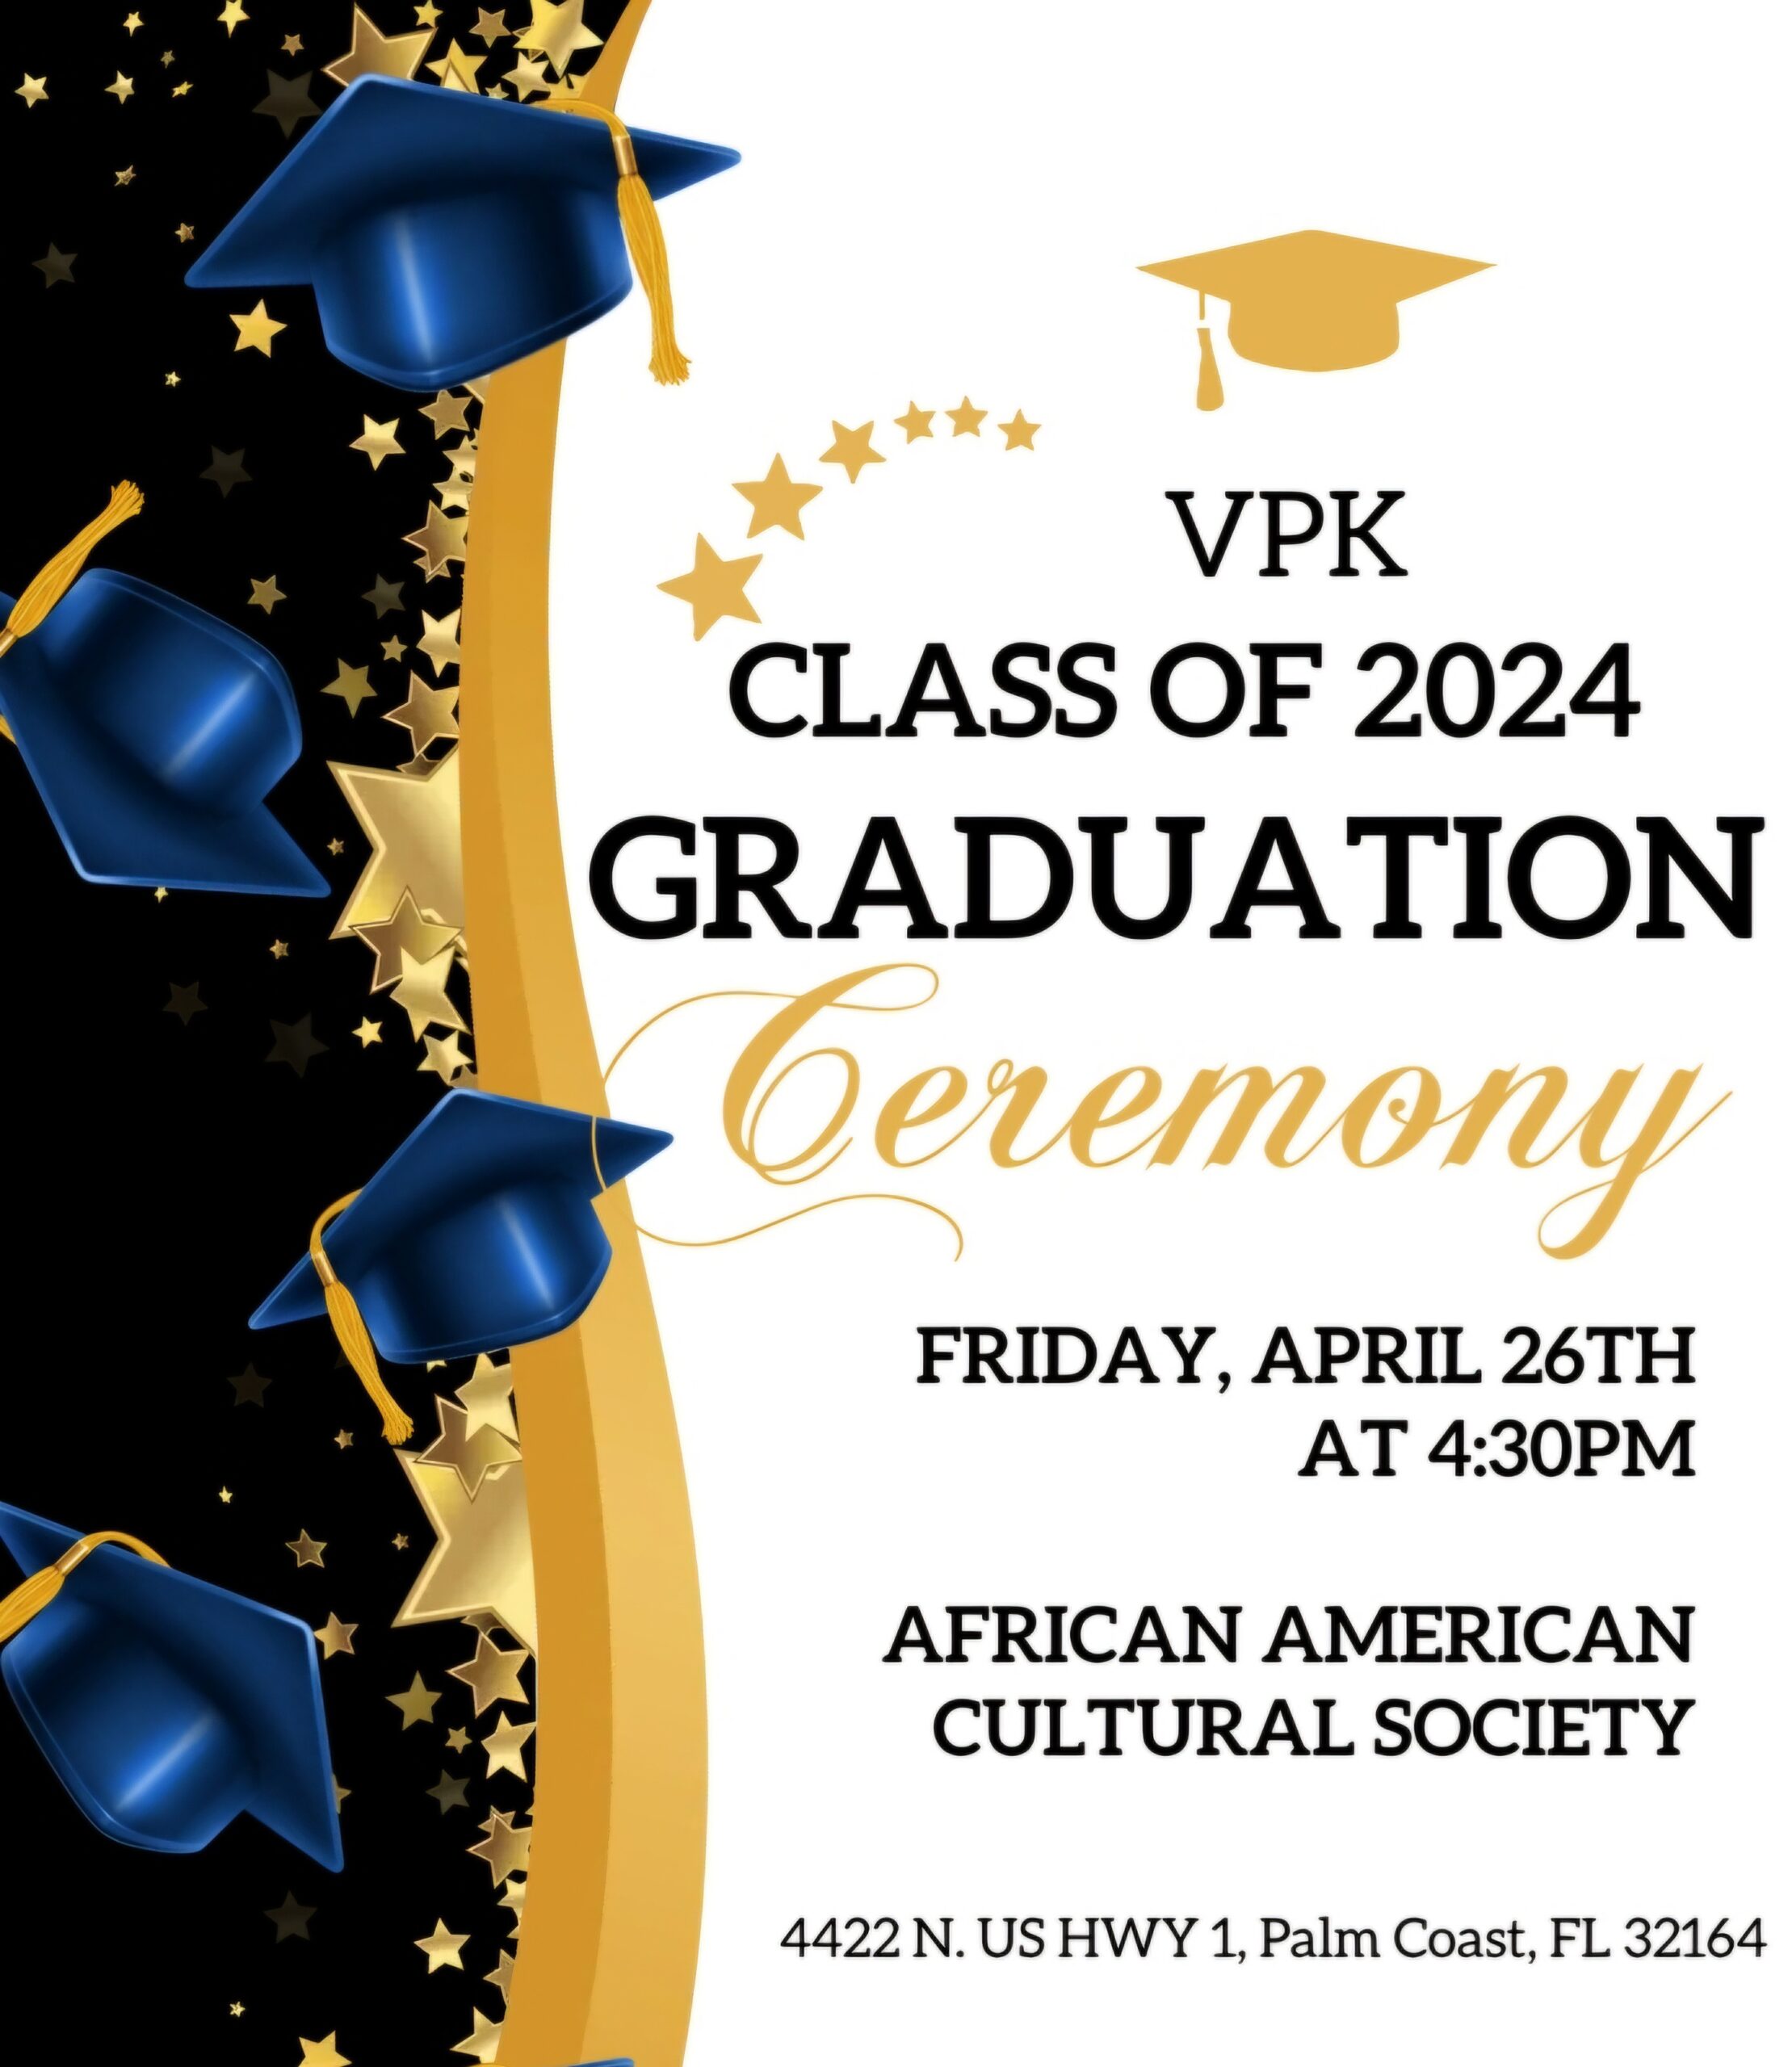 VPK Class Of 2024 Friday April 26th 4:30pm